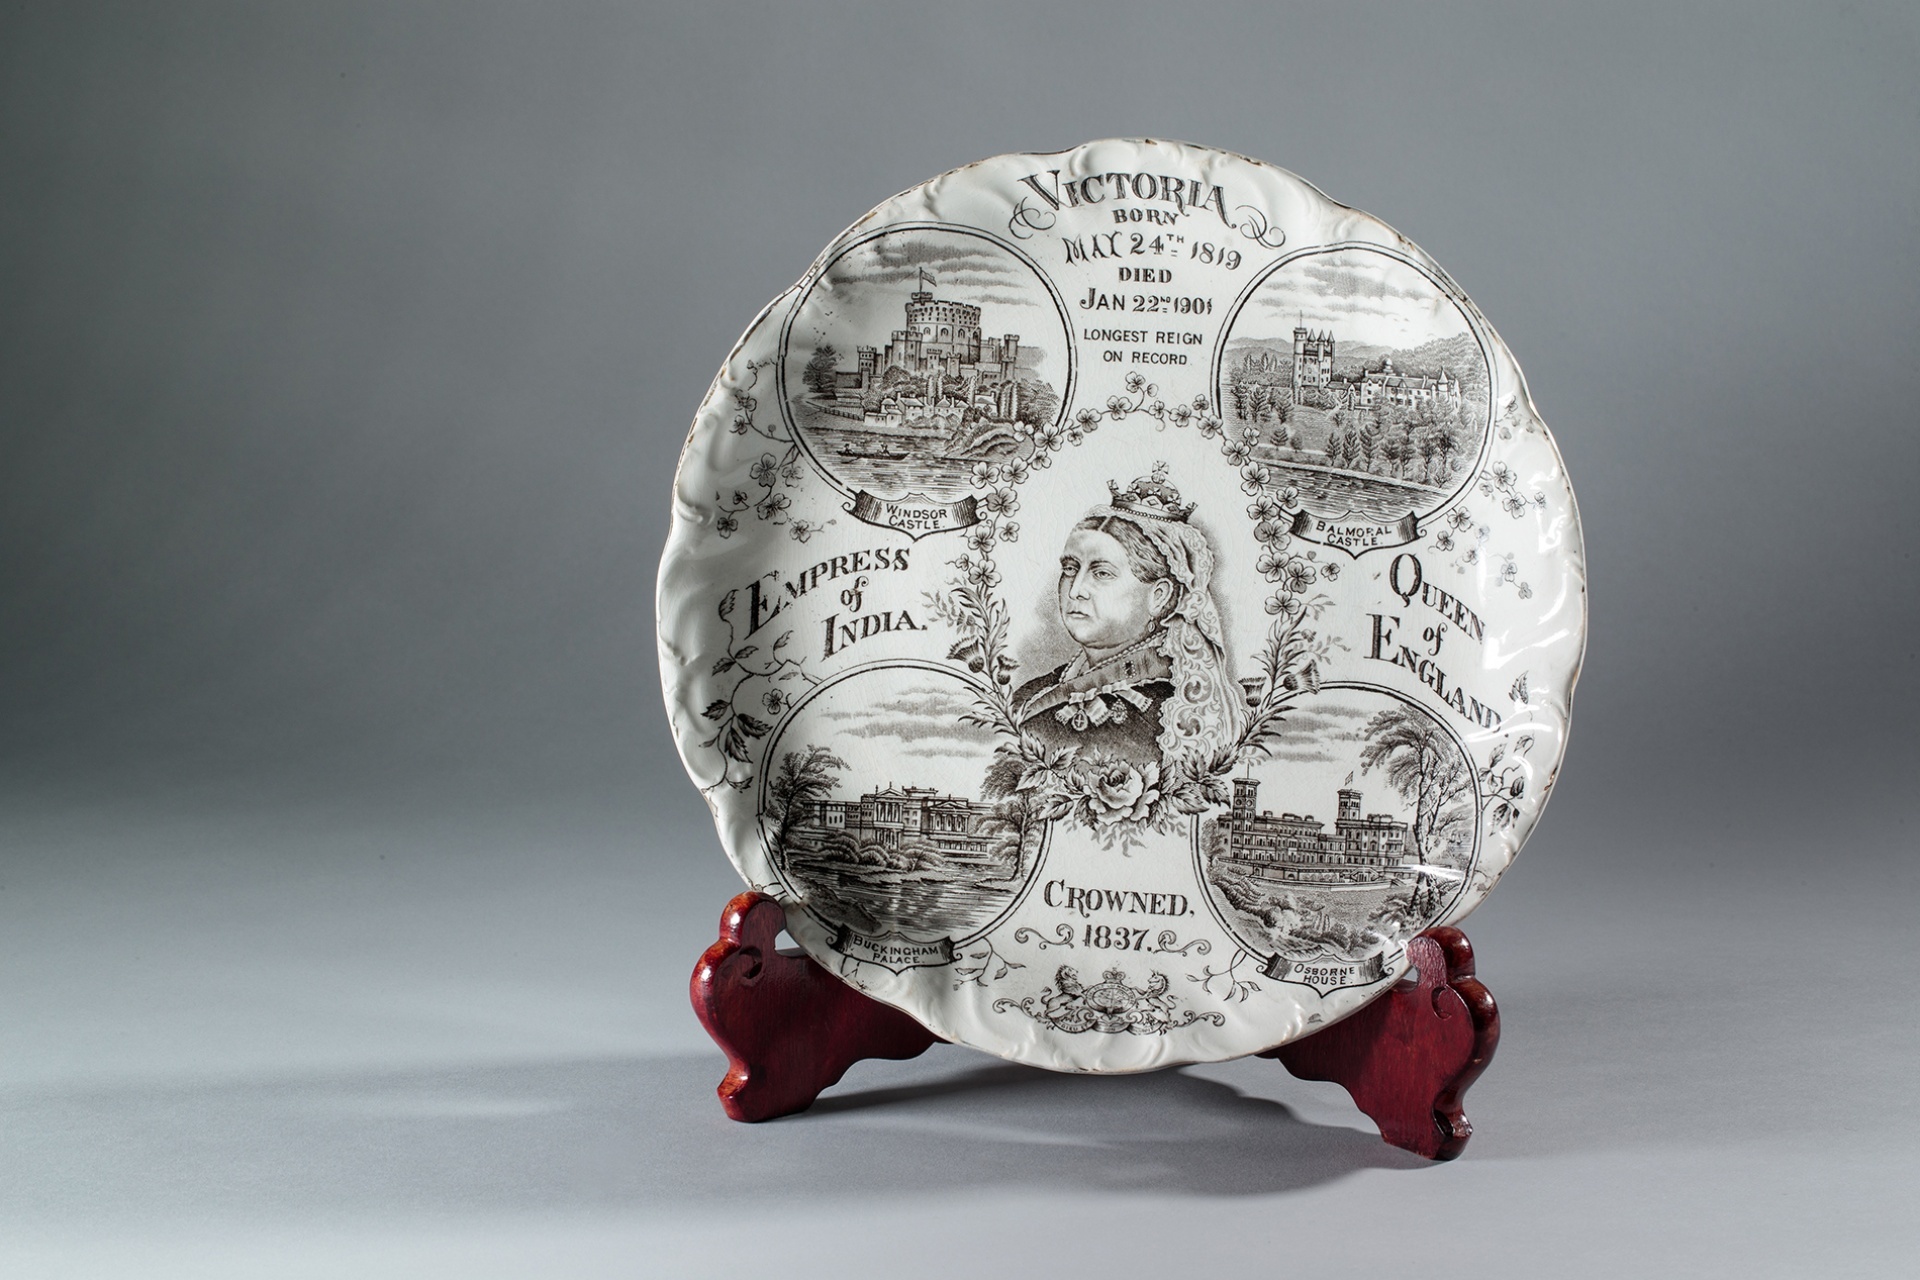 Commemorative plate for the death of Queen Victoria. On display in the John Bates and Co. shop, Christchurch Street. Canterbury Museum 1975.250.3